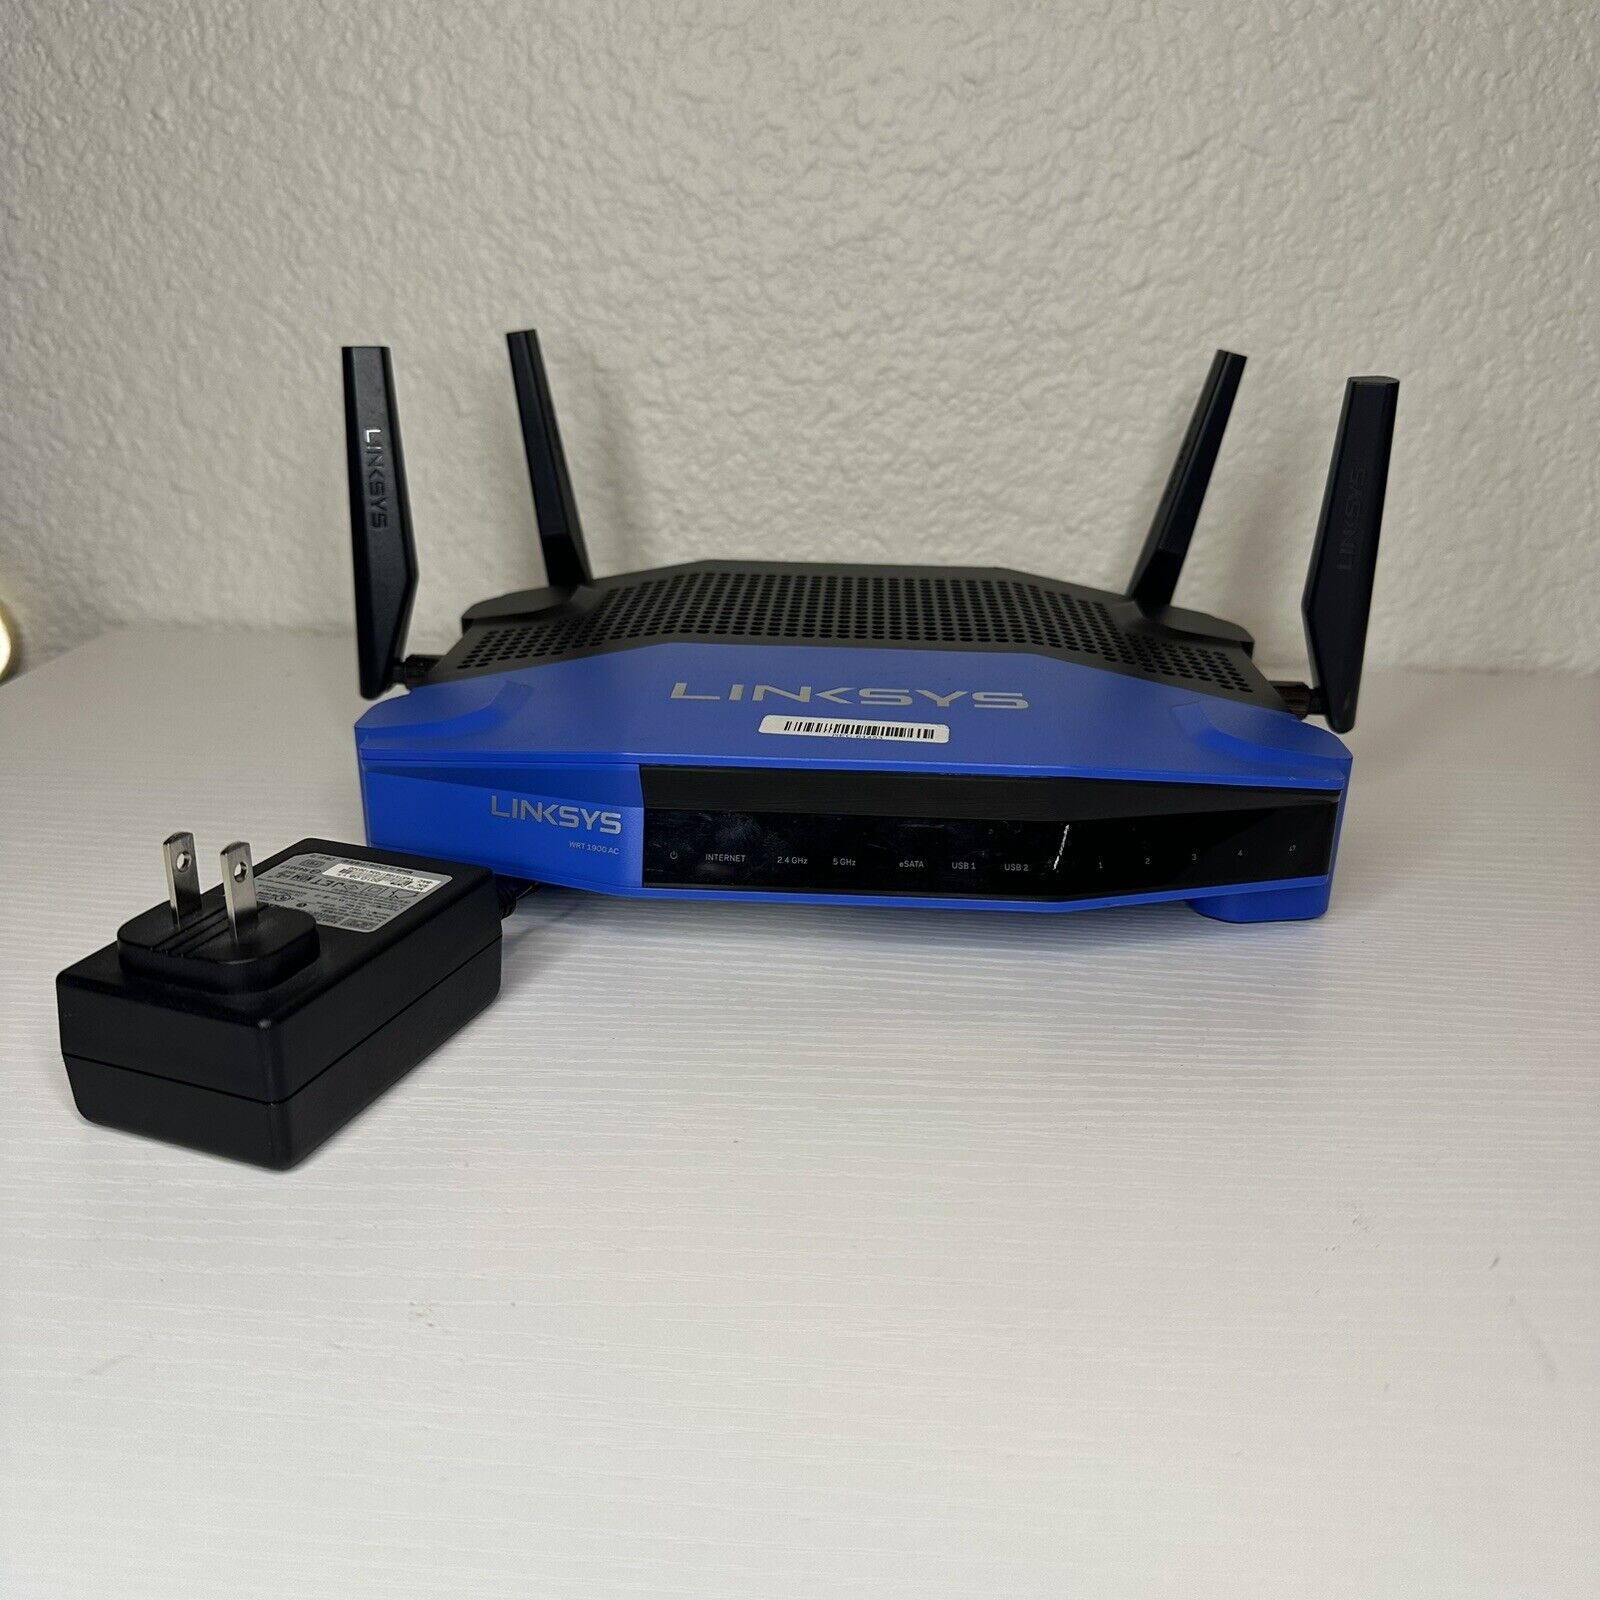 Linksys WRT1900ACS 1300 Mbps 4 Port Dual-Band Wi-Fi Router POWERS ON